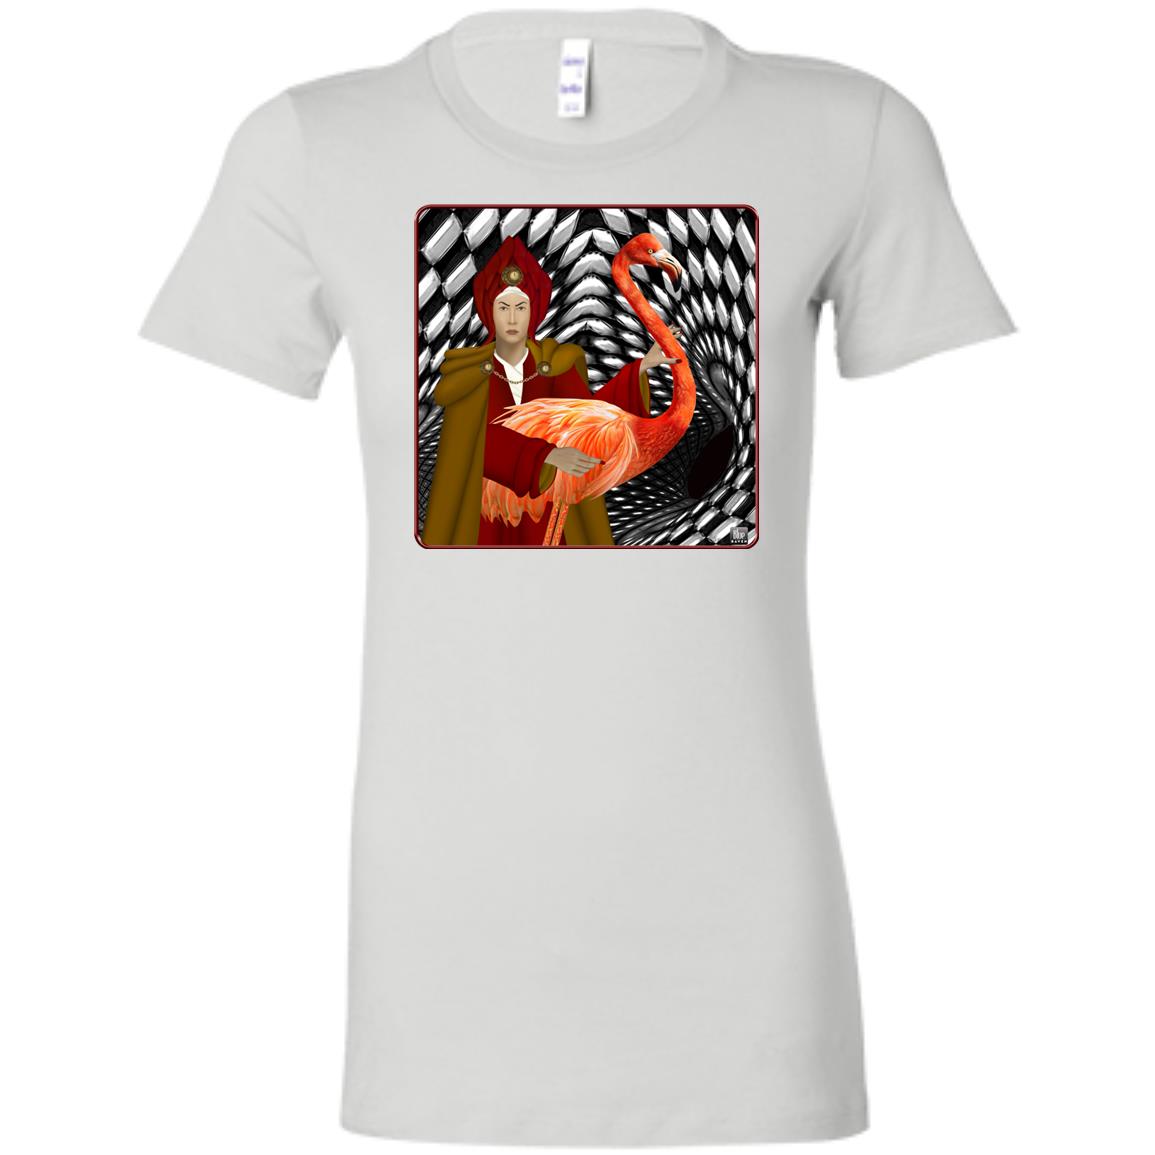 THE RED QUEEN with the flamingo - Women's Fitted T-Shirt